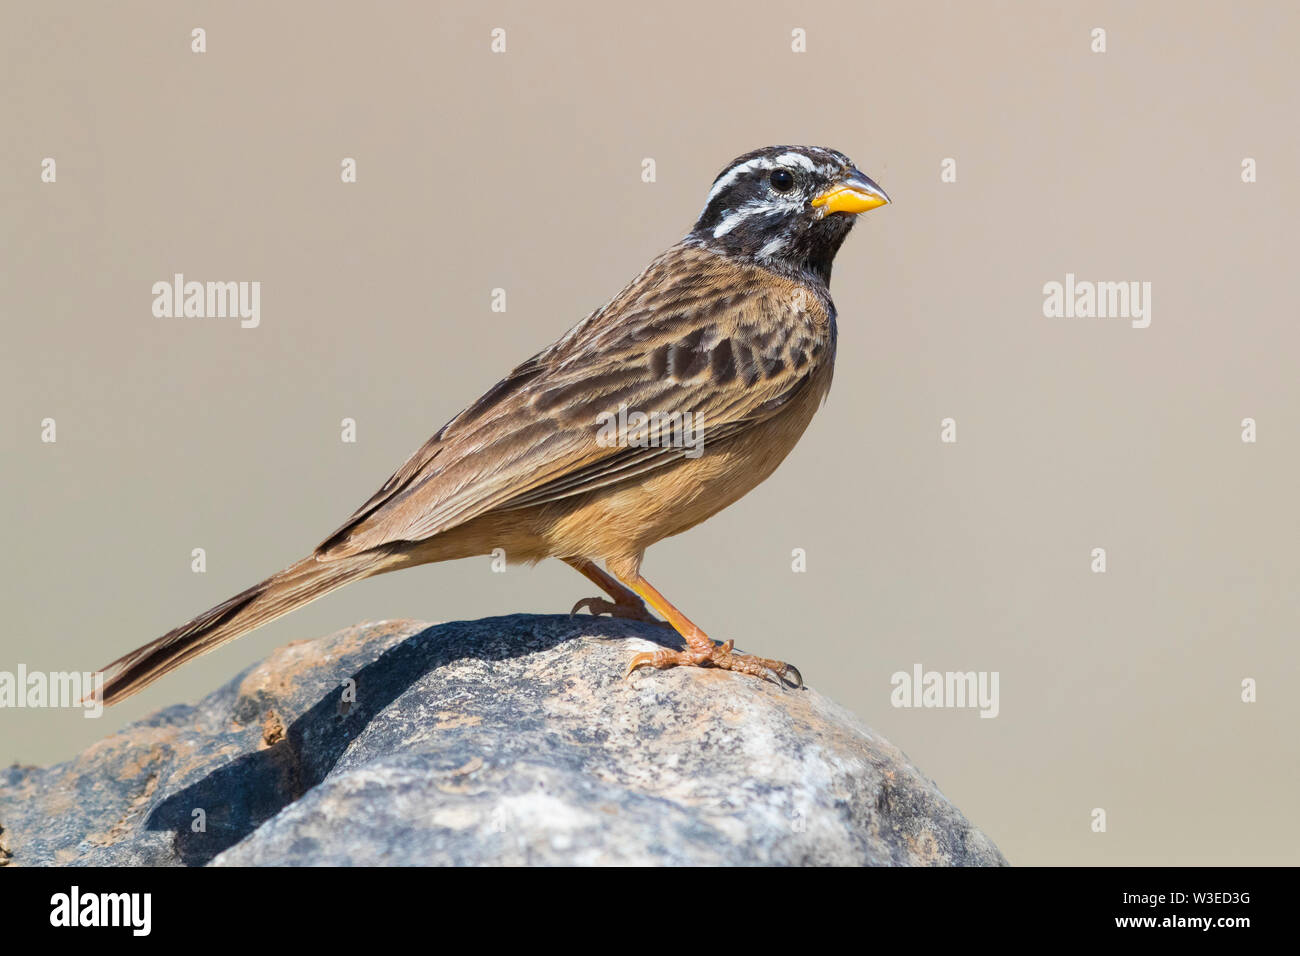 Cinnamon-breasted Bunting ( Emberiza tahapisi), side view of an adult male standing on a rock, Dhofar, Oman Stock Photo